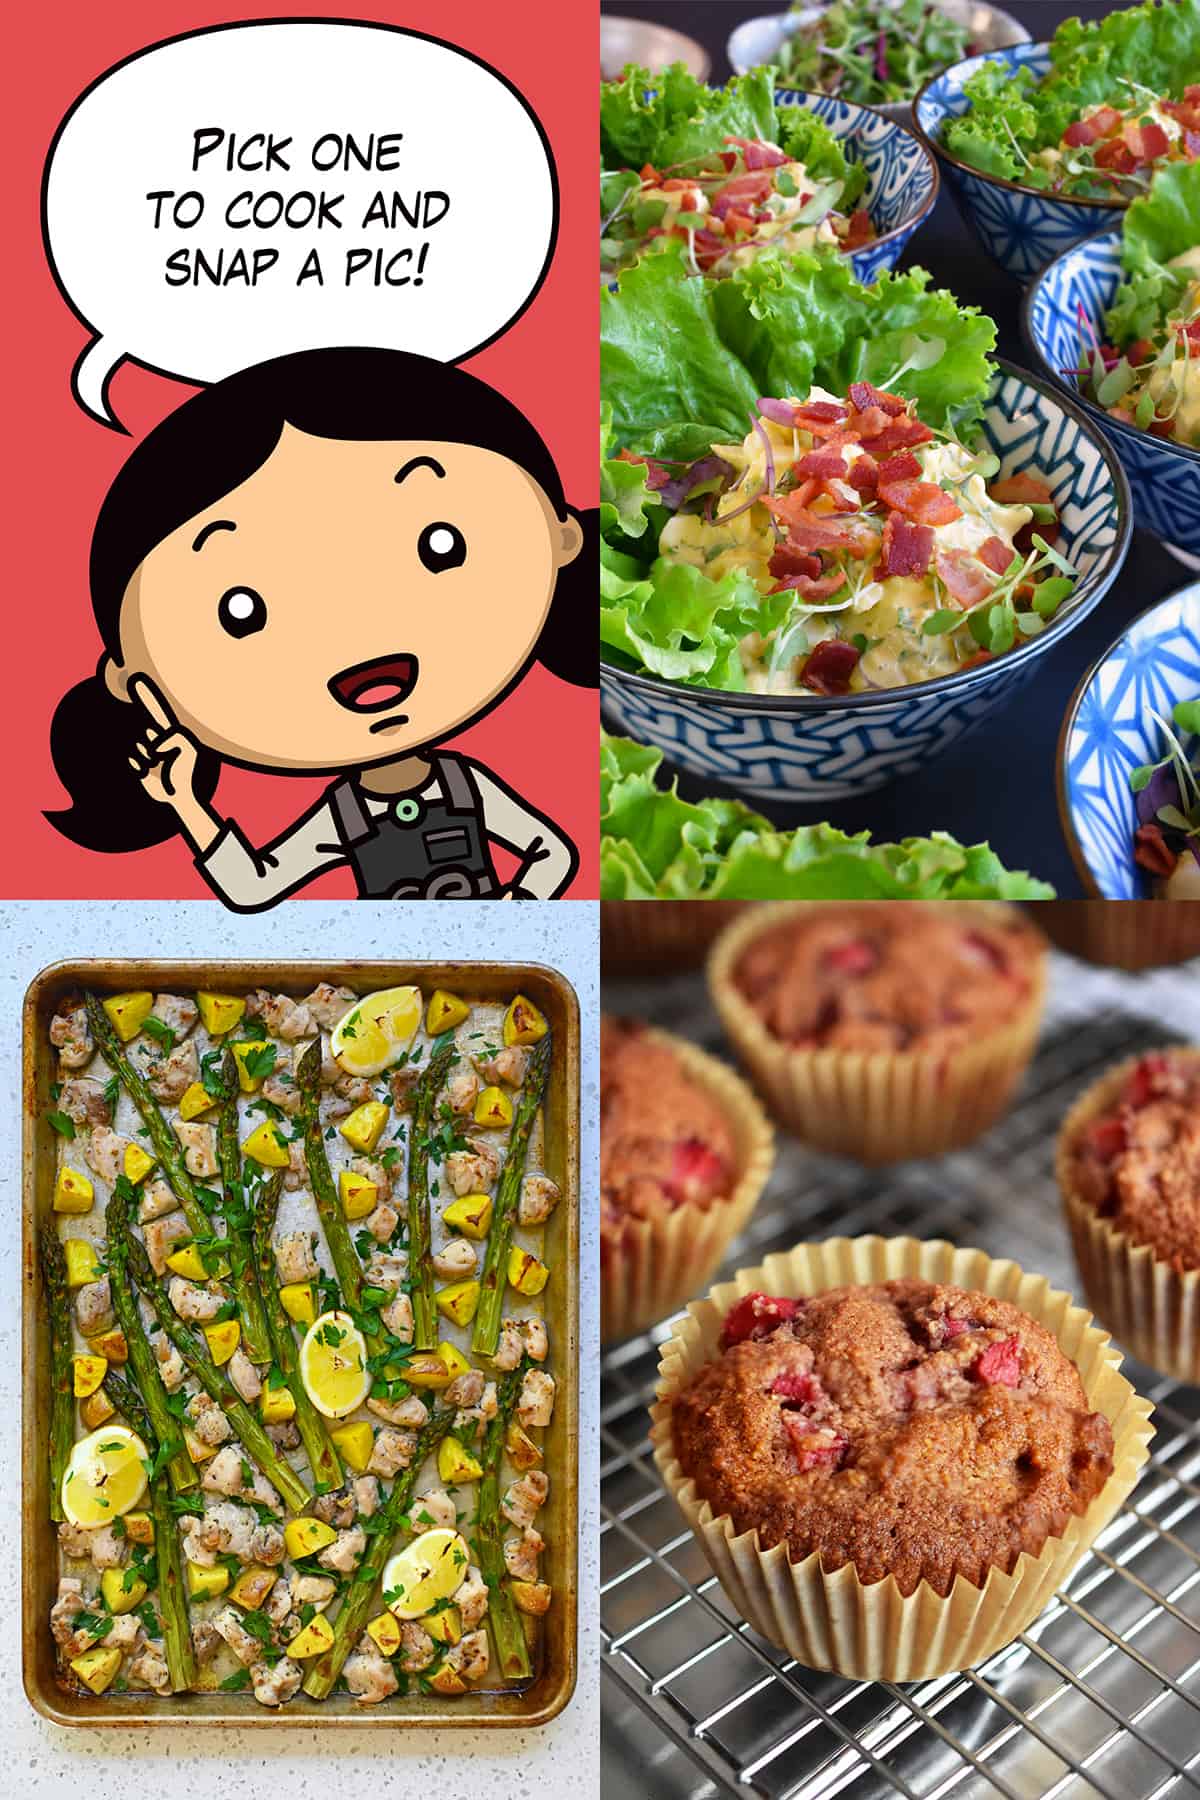 A cartoon Michelle Tam is telling people to cook and photograph one of the dishes pictured: bacon deviled egg salad, strawberry muffins, and sheet pan Greek chicken.